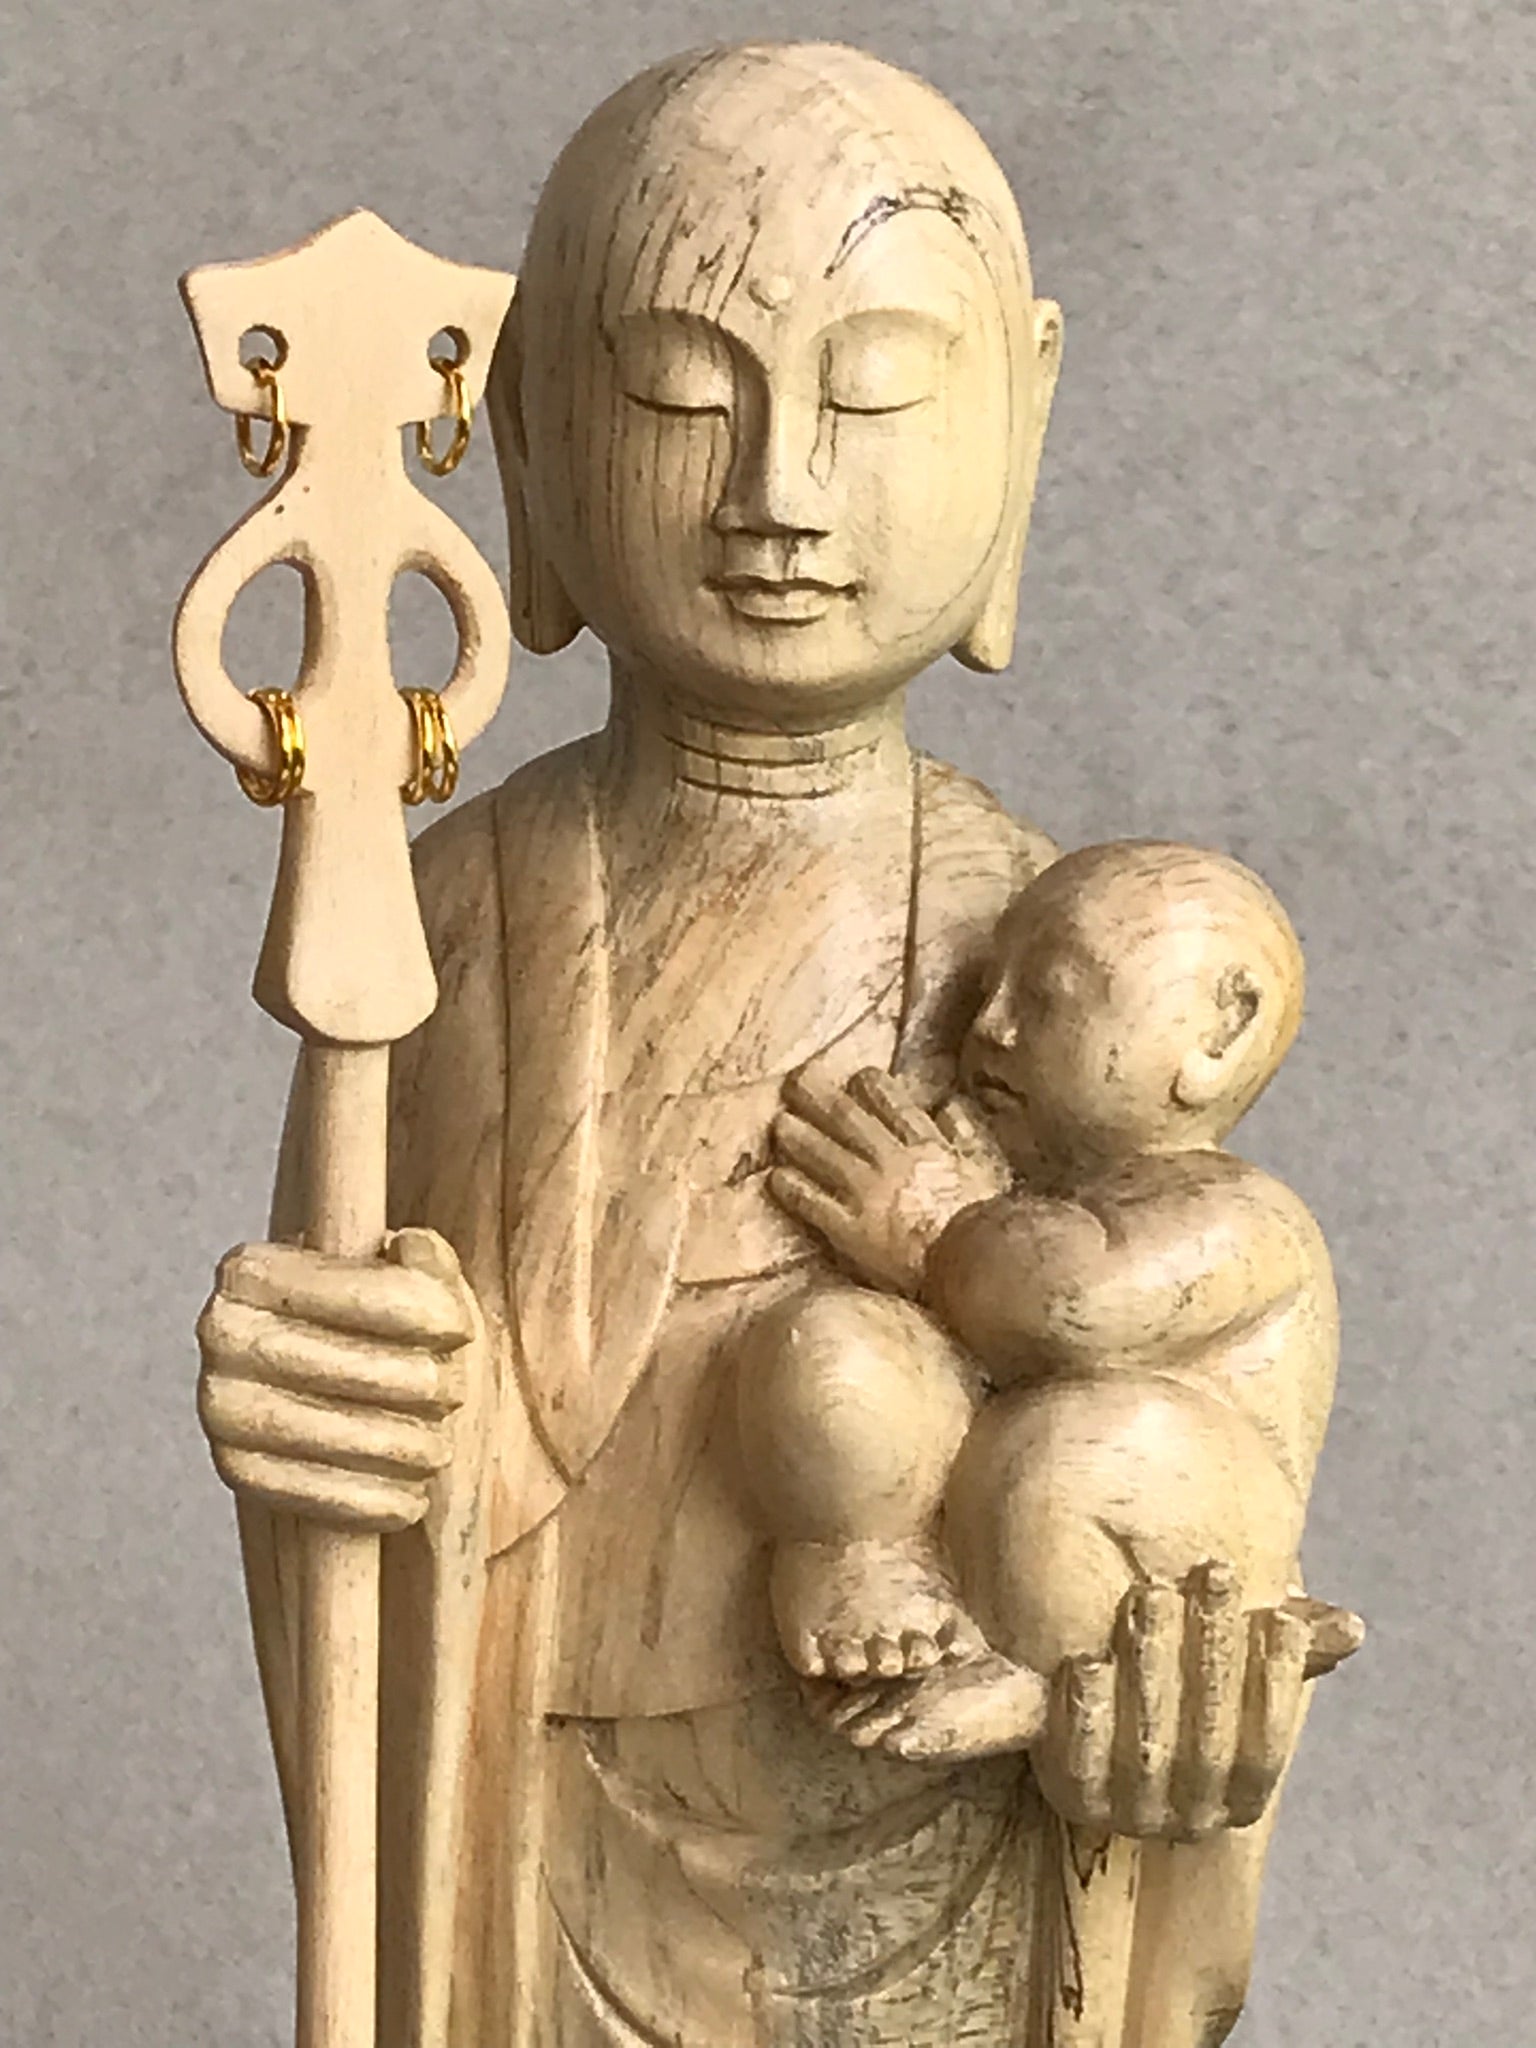 JIzo man holding a staff and a baby, 25cm, 10 inches, color variation in wood from warm light brownt to grey grain.